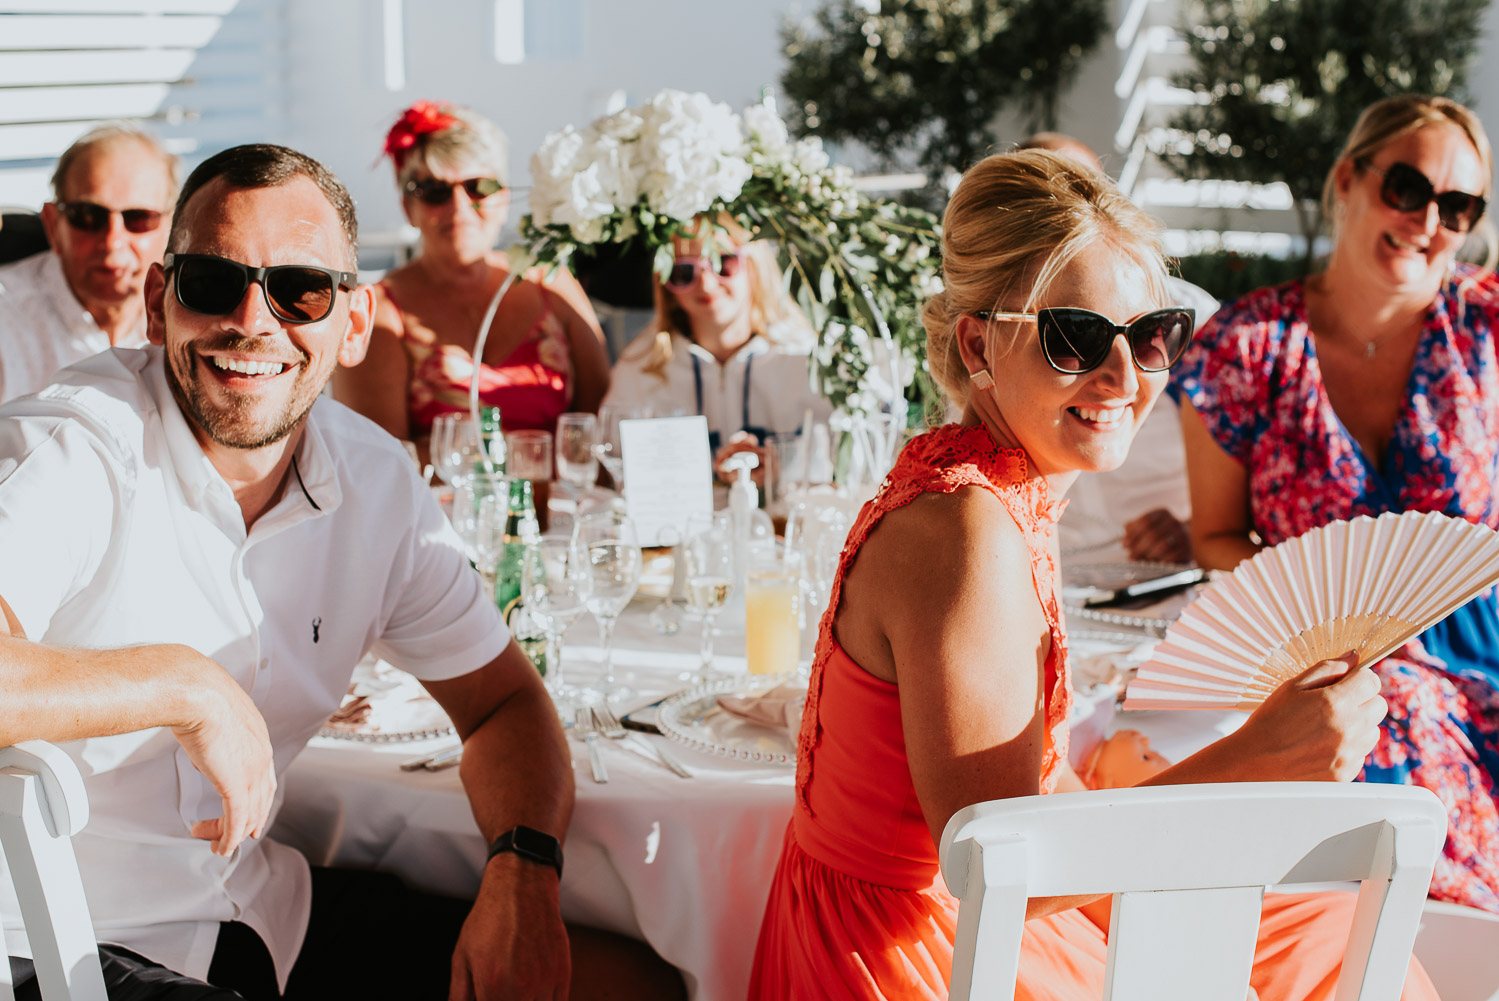 Wedding photographer Santorini: guests sat at their banquet table basked in the sun smiling as they listen to the speeches by Ben and Vesna.